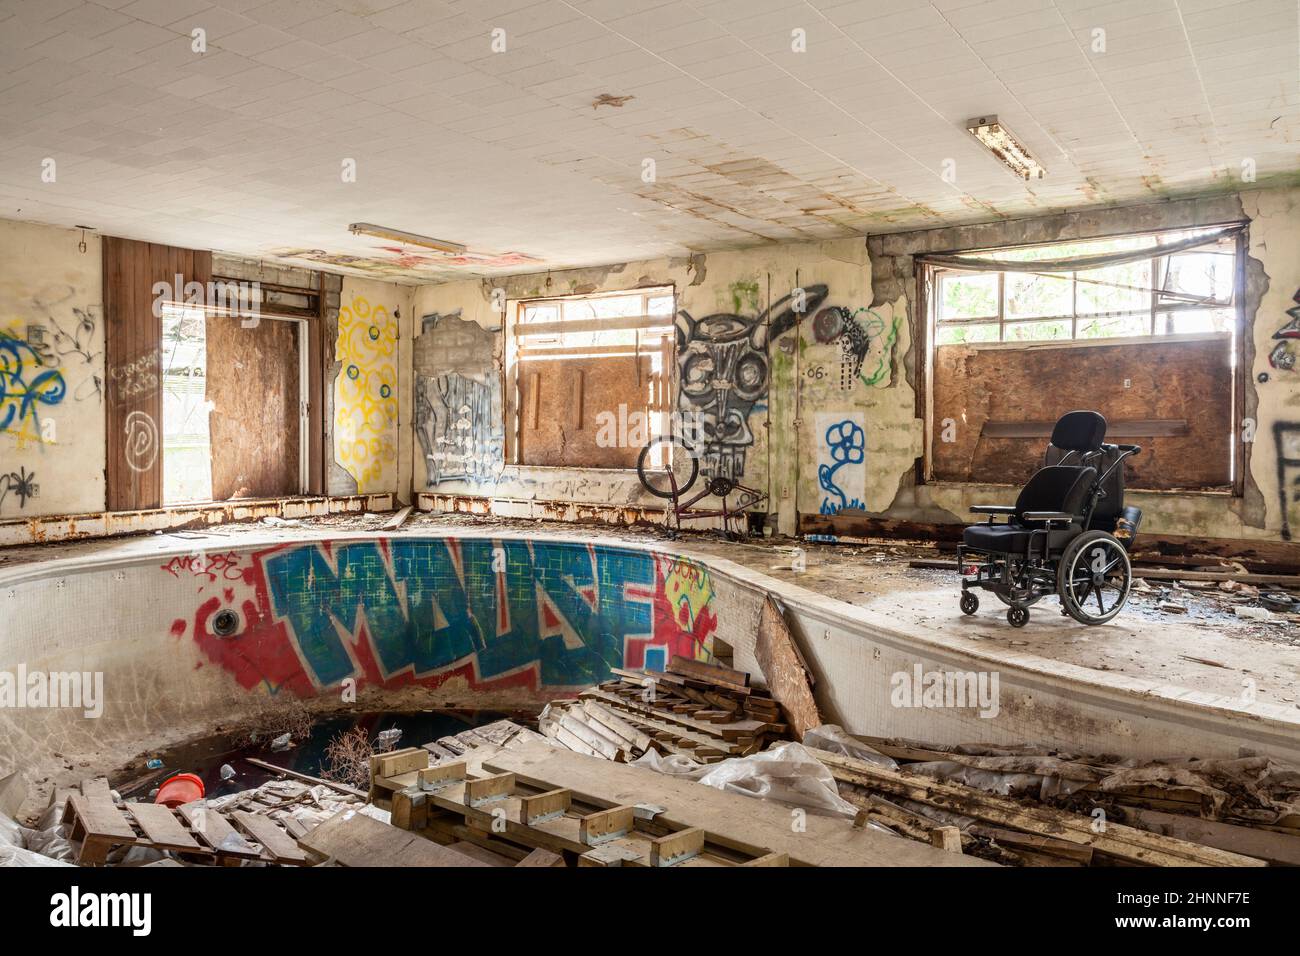 An old and abandoned indoor swimming pool with graffiti and garbage everywhere. Stock Photo